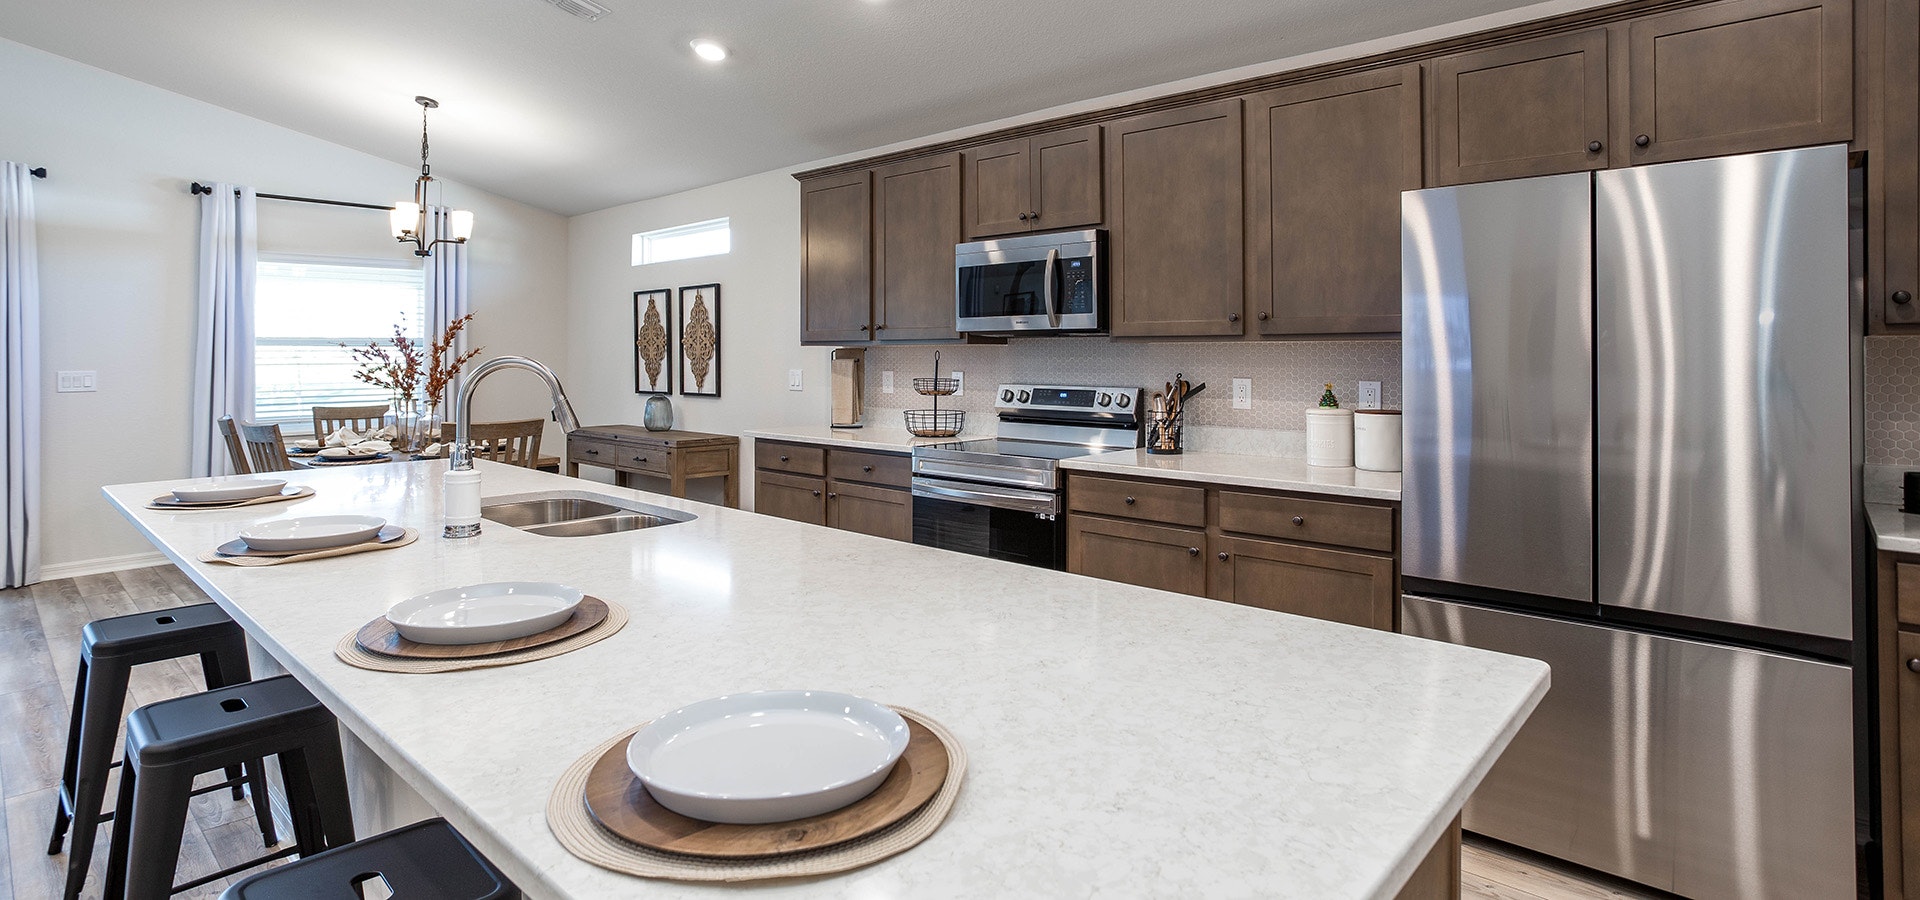 Kitchen in a new construction home in Zephyrhills